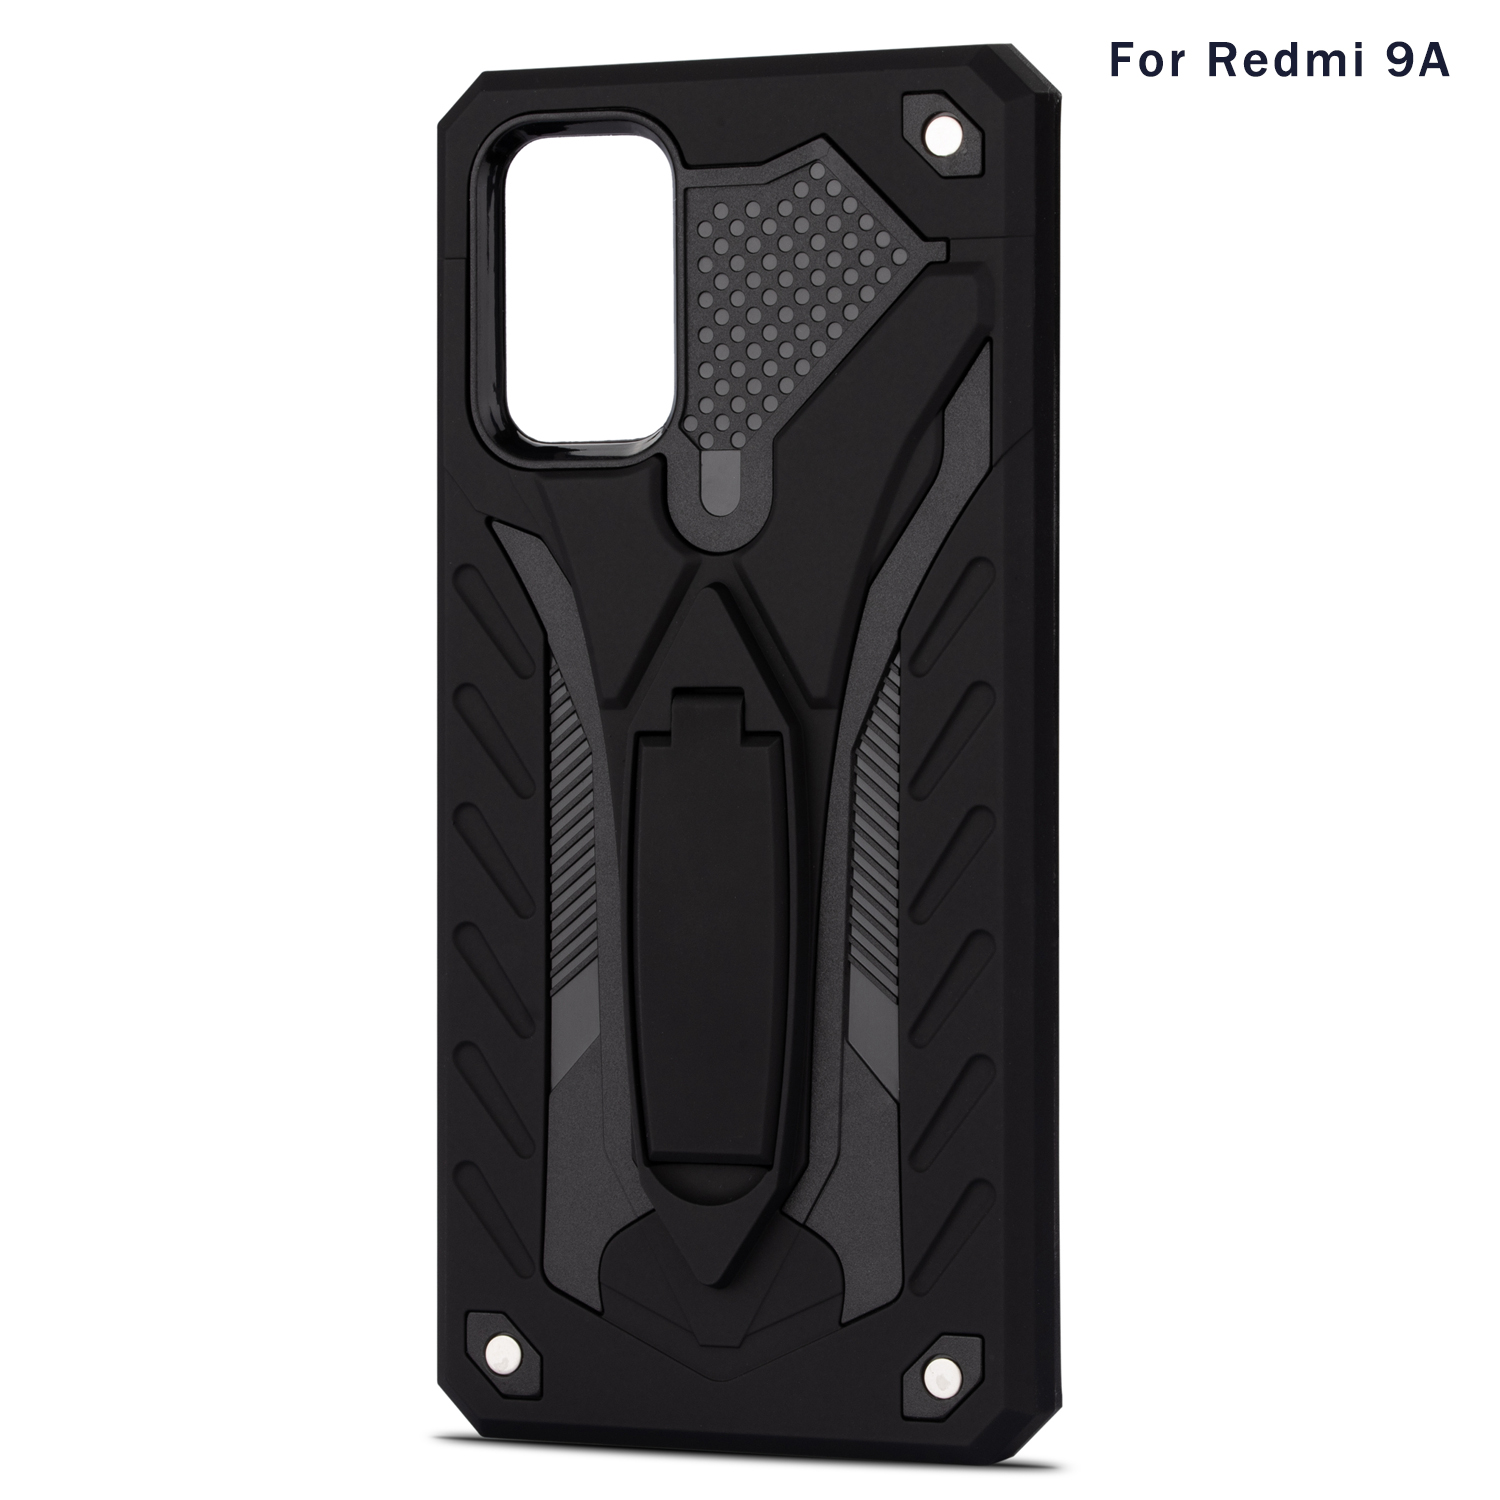 Bakeey-for-Xiaomi-Redmi-9A-Case-Armor-Shockproof-Anti-Fingerprint-with-Ring-Bracket-Stand-PC--TPU-Pr-1726498-3